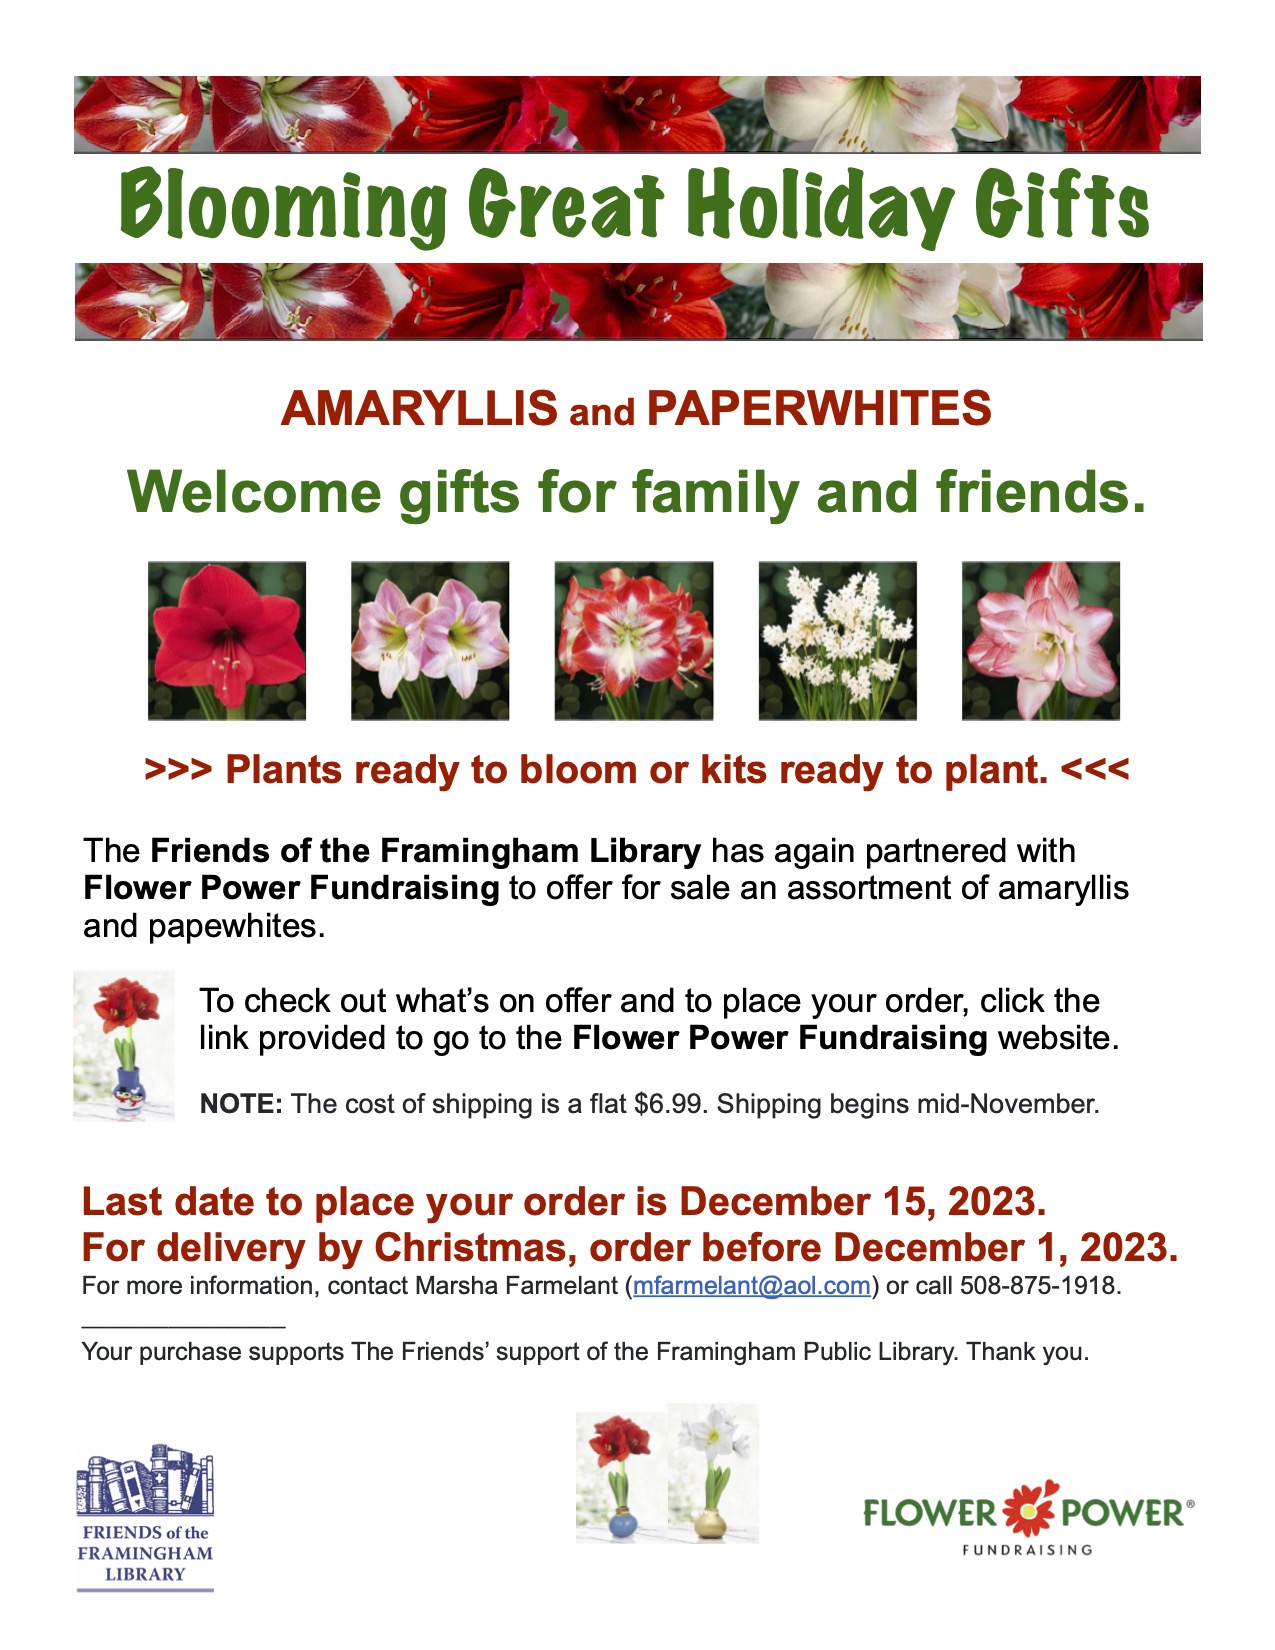 Flyer for the Friends of the Library 2023 Fall Bulb Sale